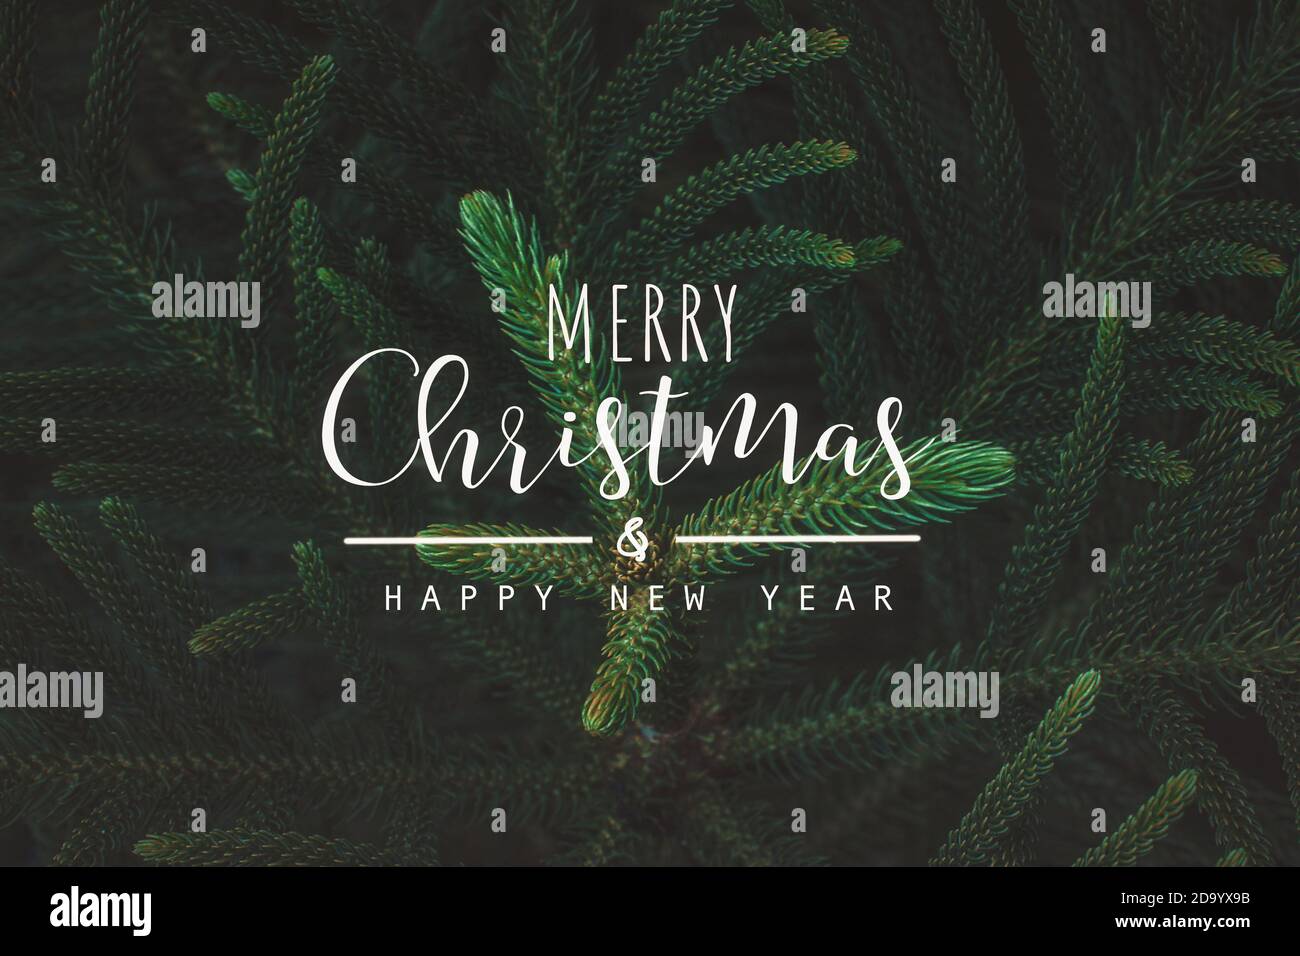 merry christmas and happy new year text on Fir tree branch ,Great for ...